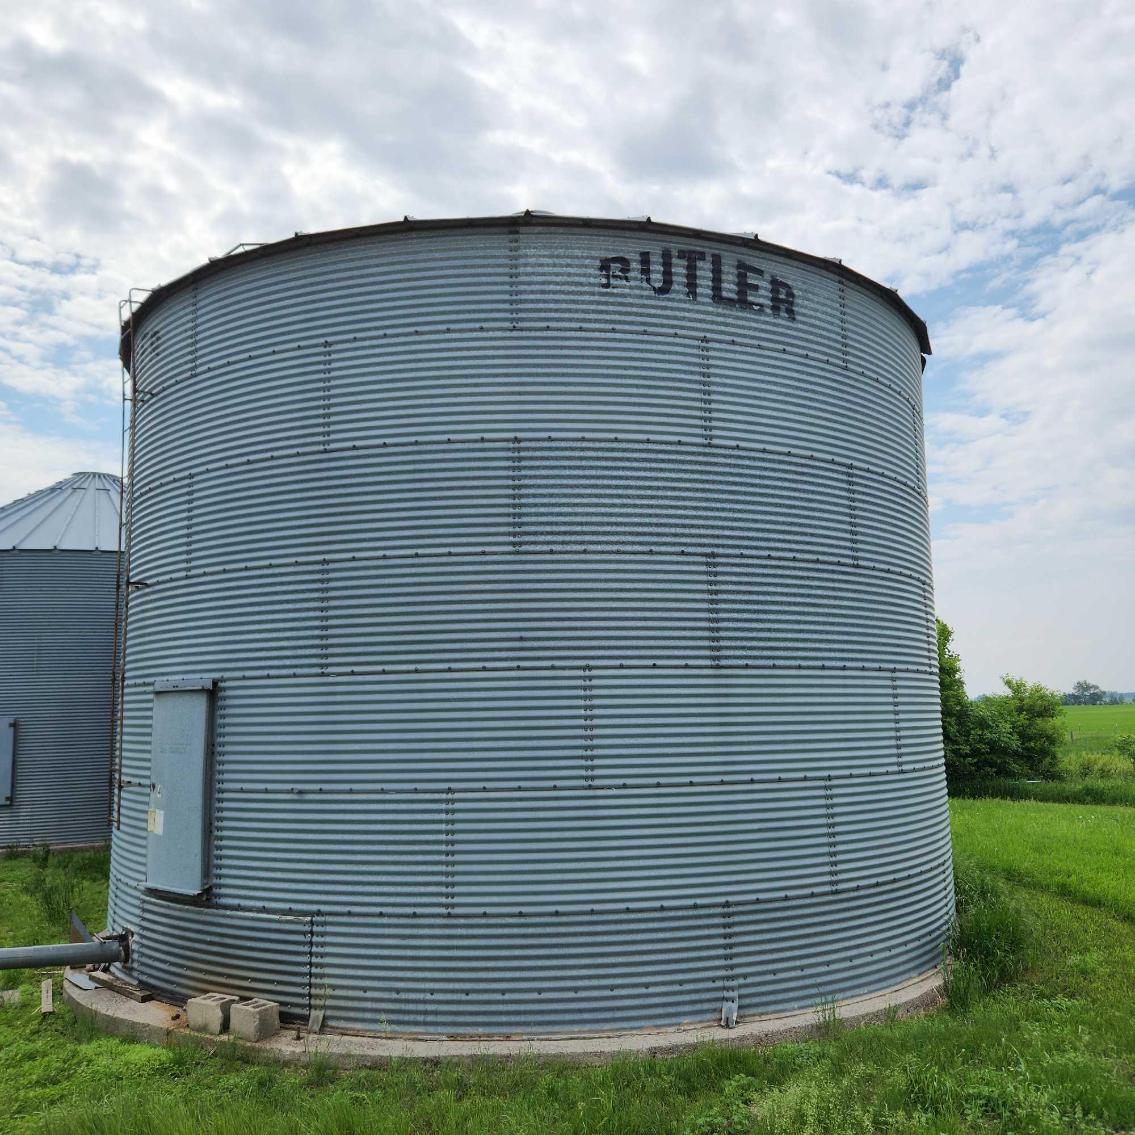 Pole Building & Grain Bins to be Moved